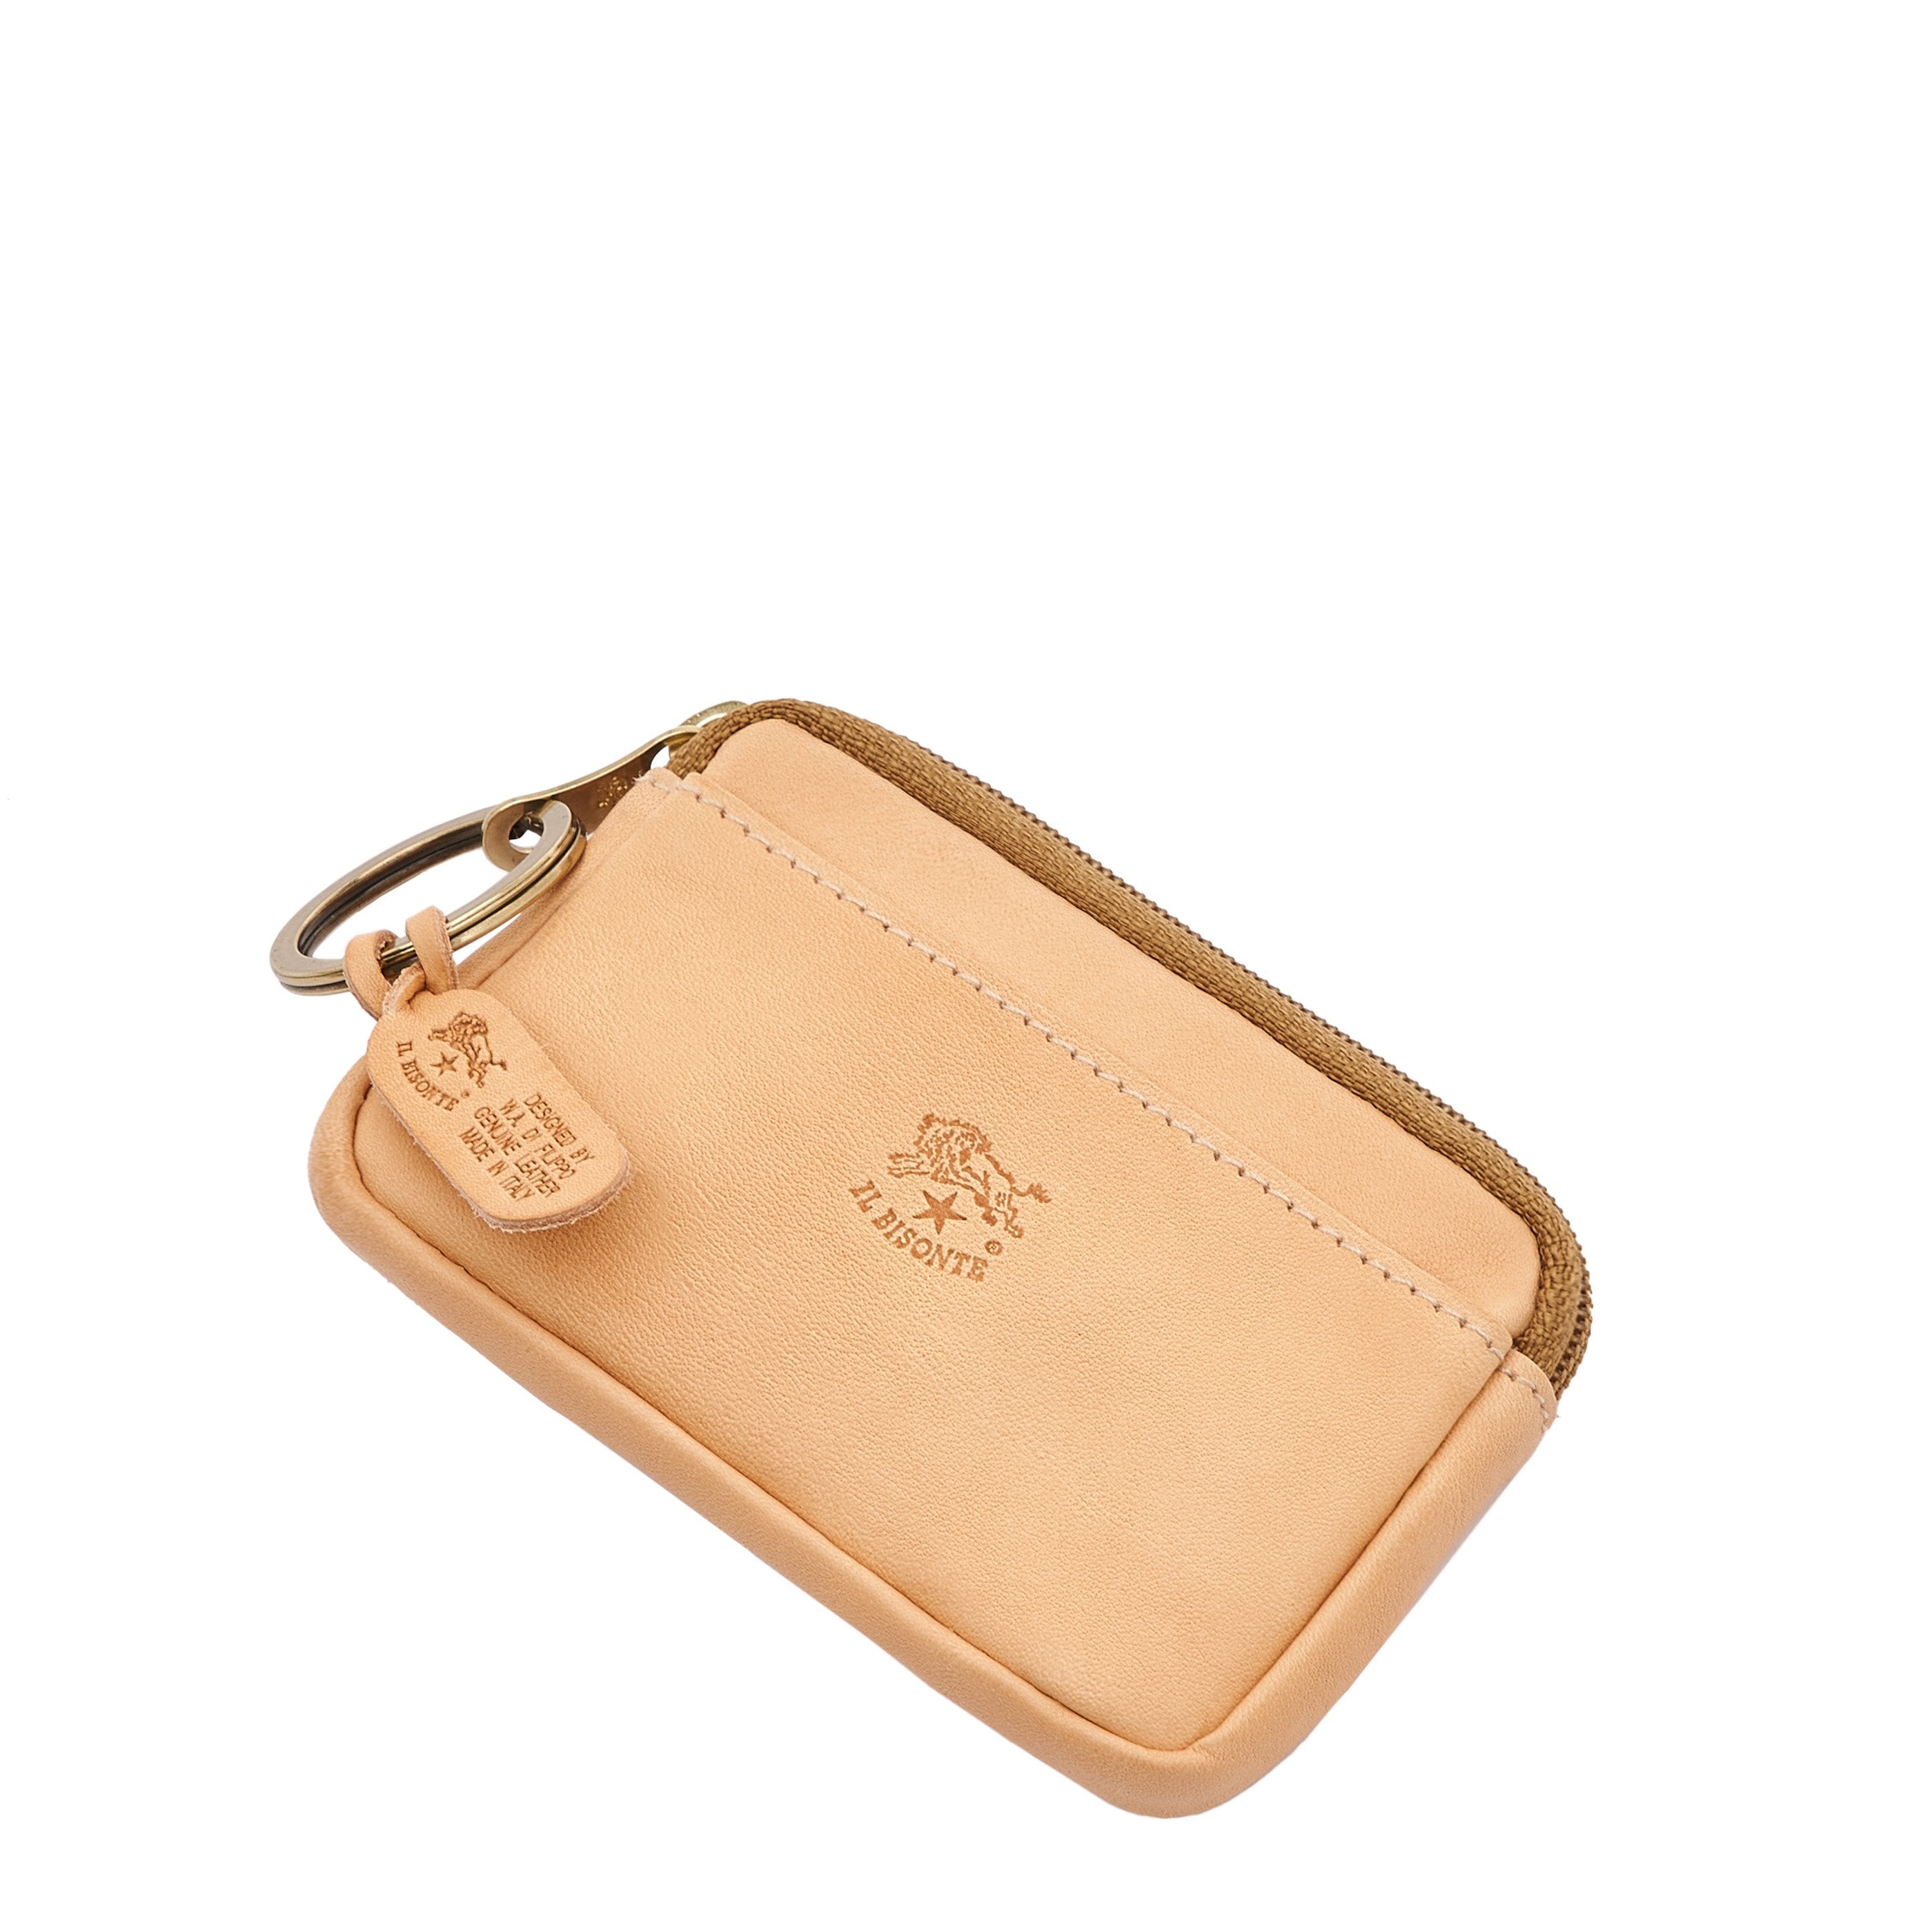 Coin purse in calf leather color natural